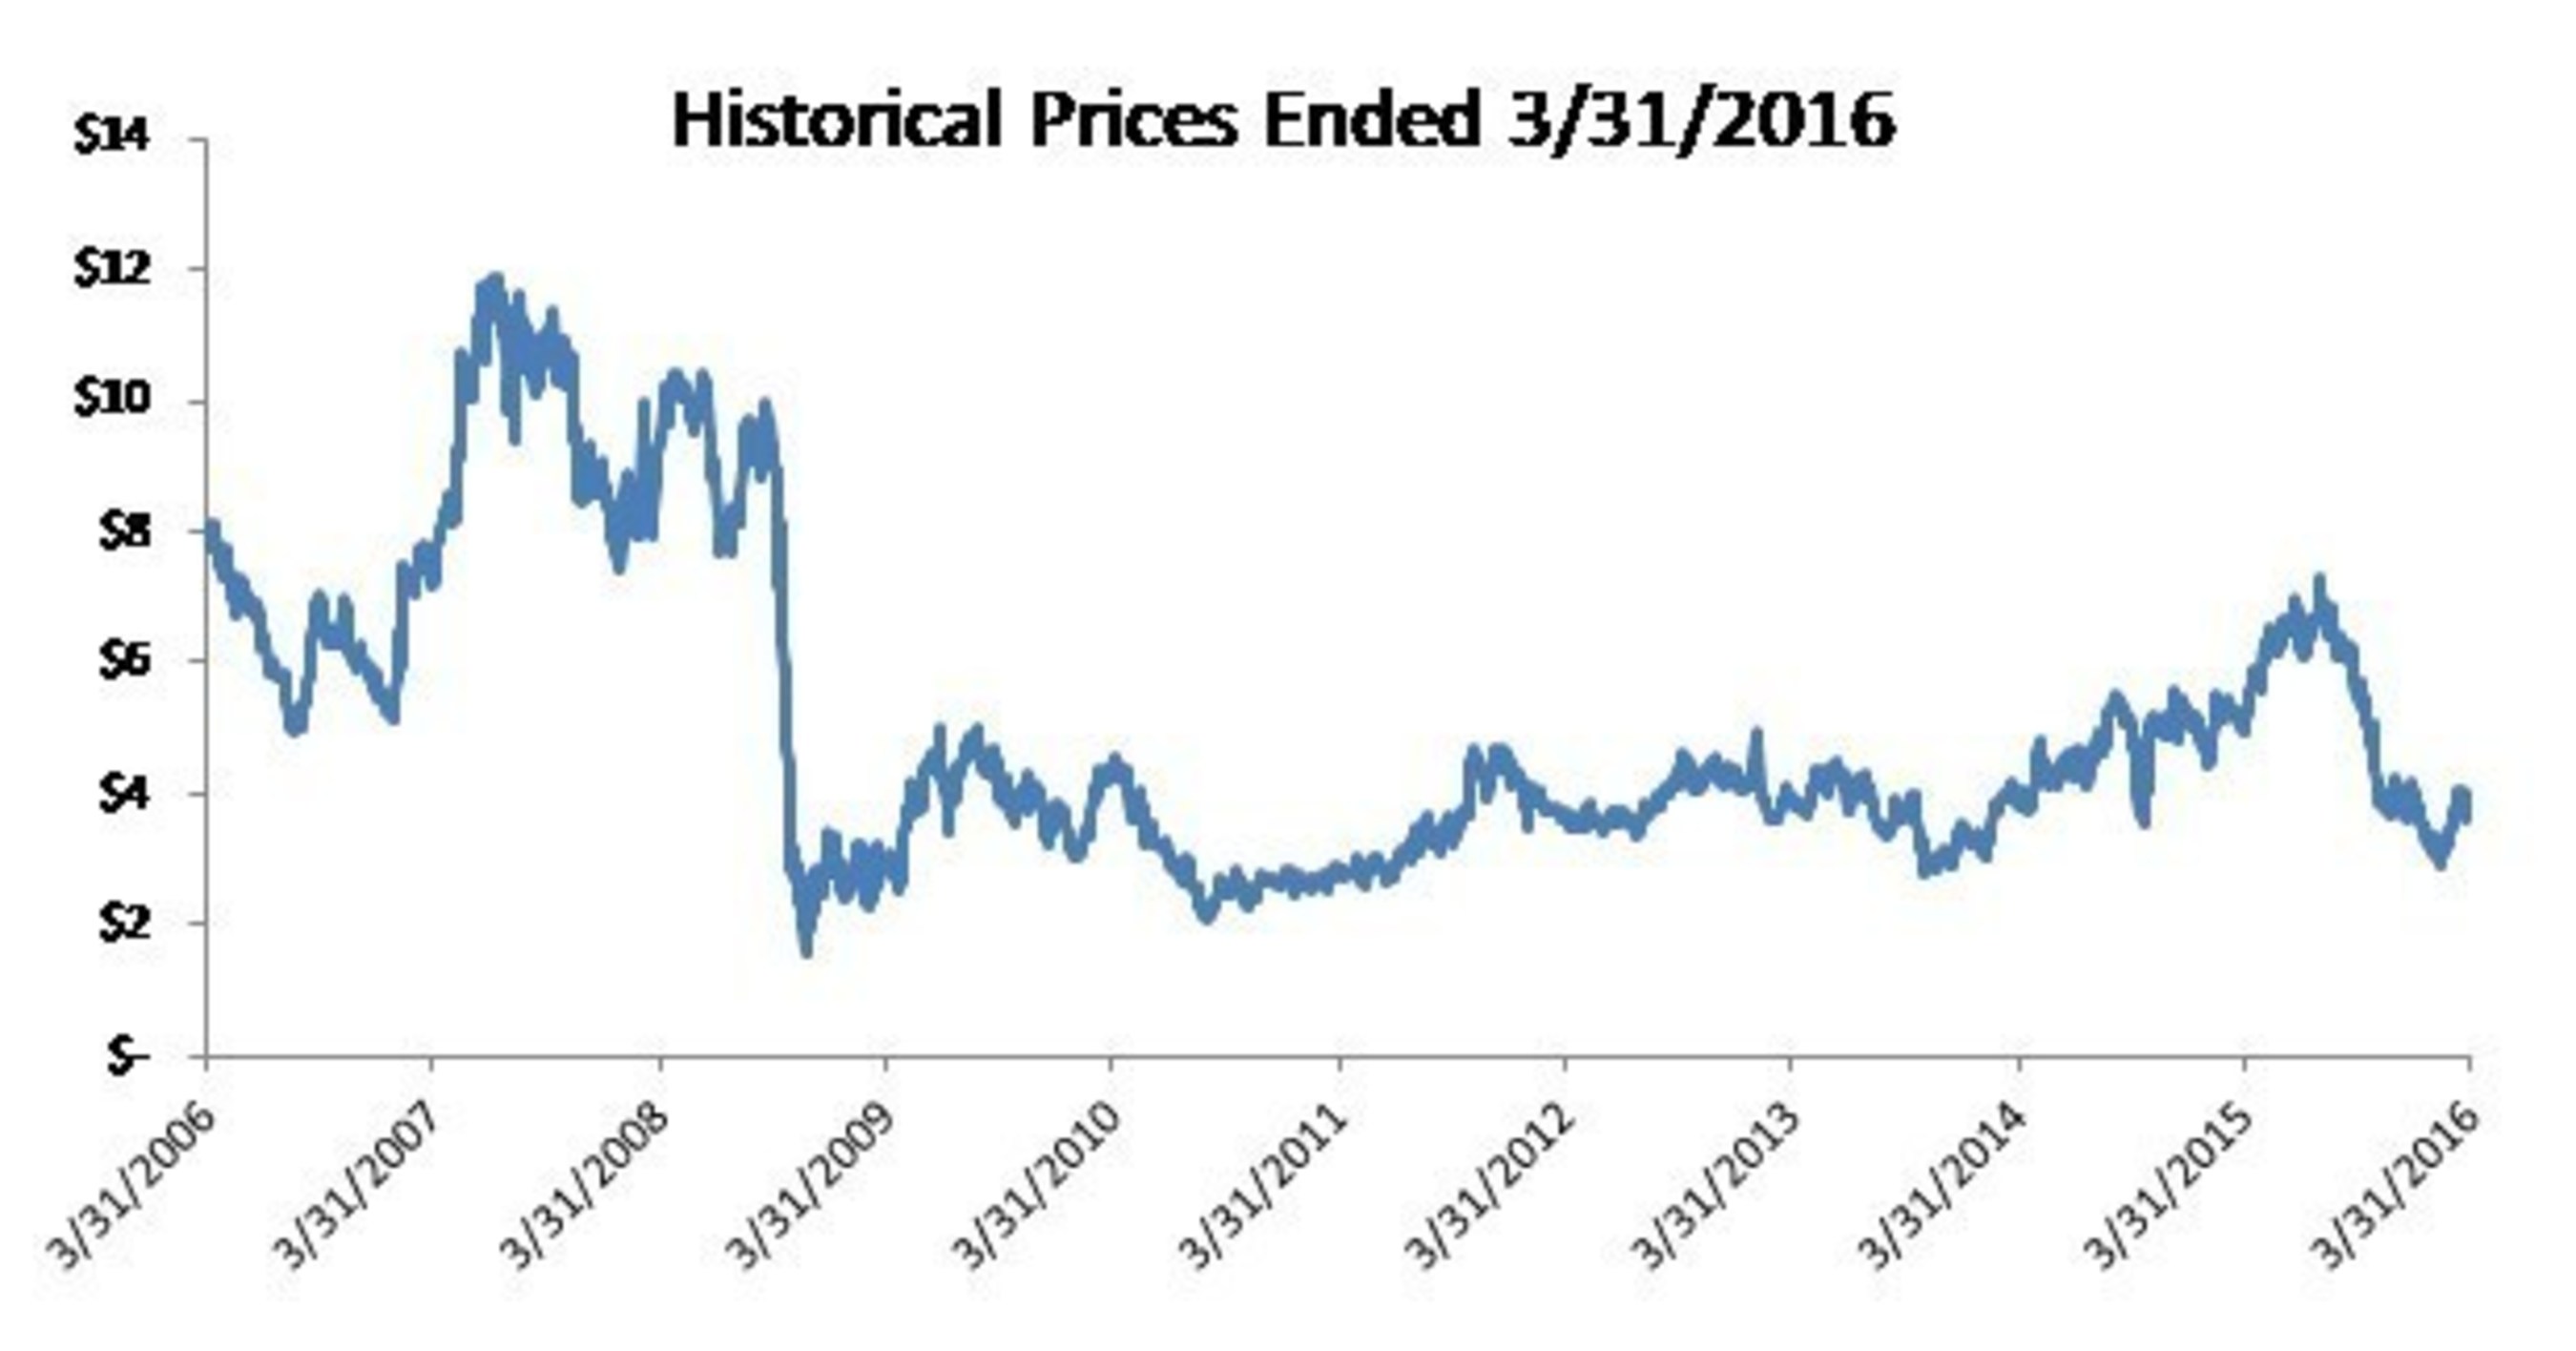 Historical Prices Ended 3/31/2016